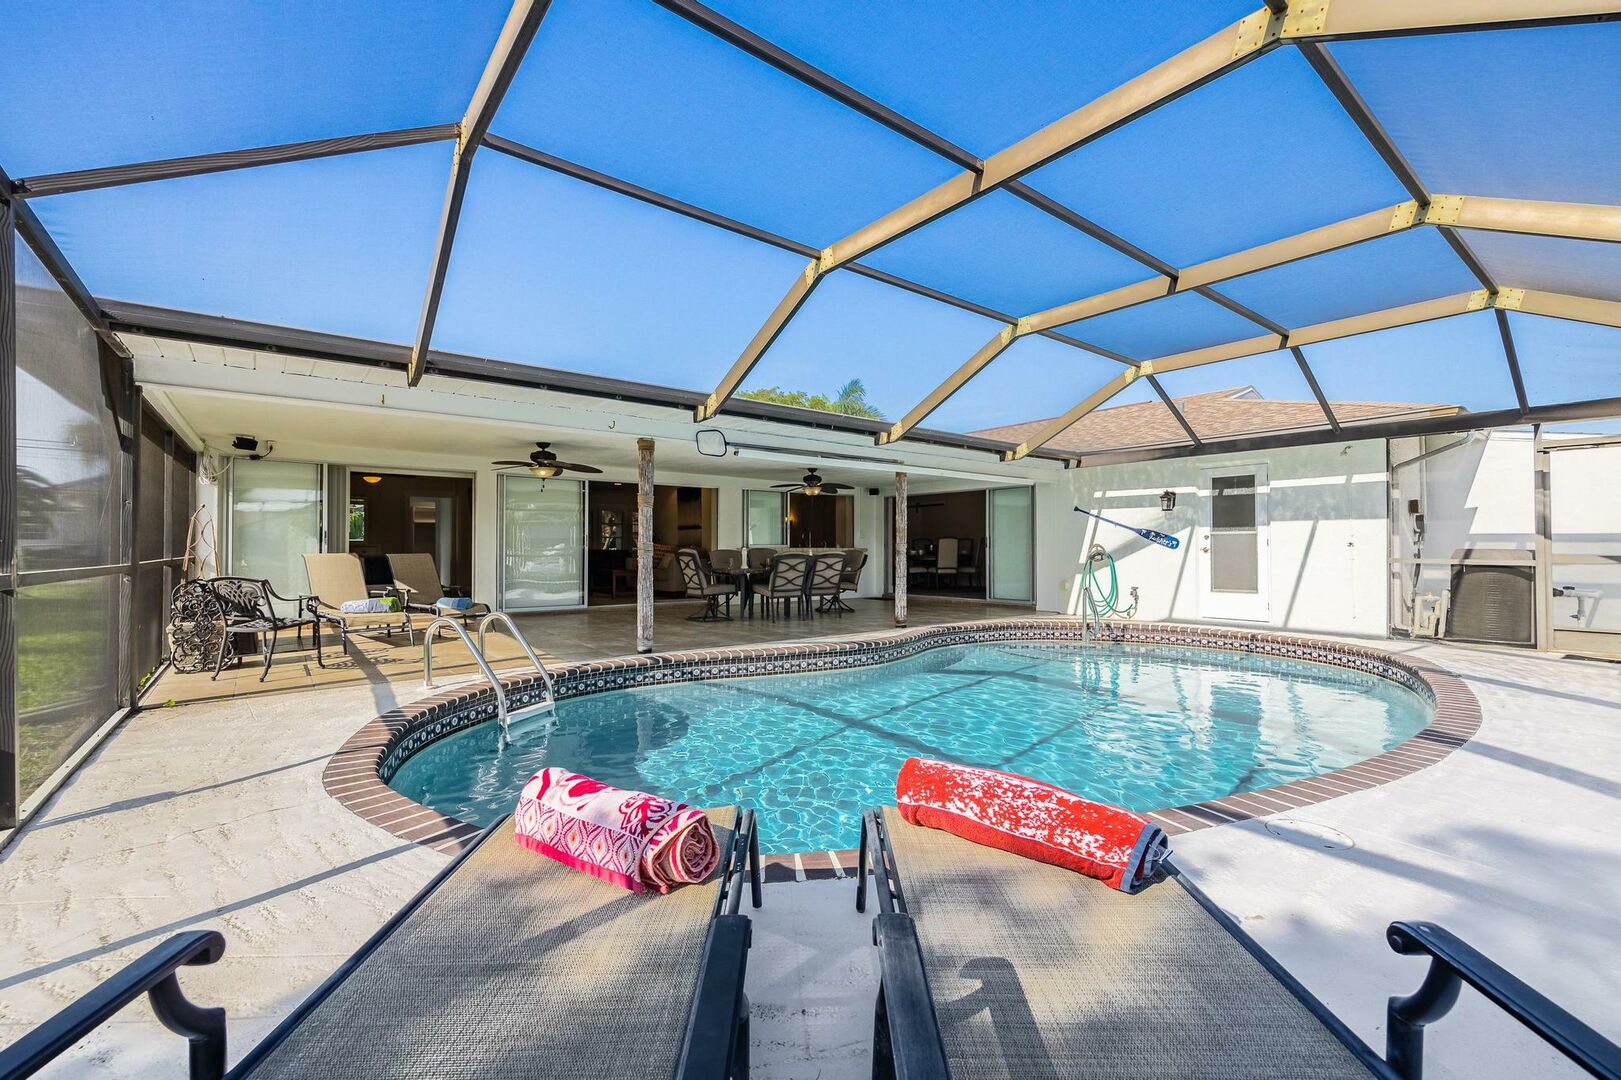 Private heated pool vacation rental